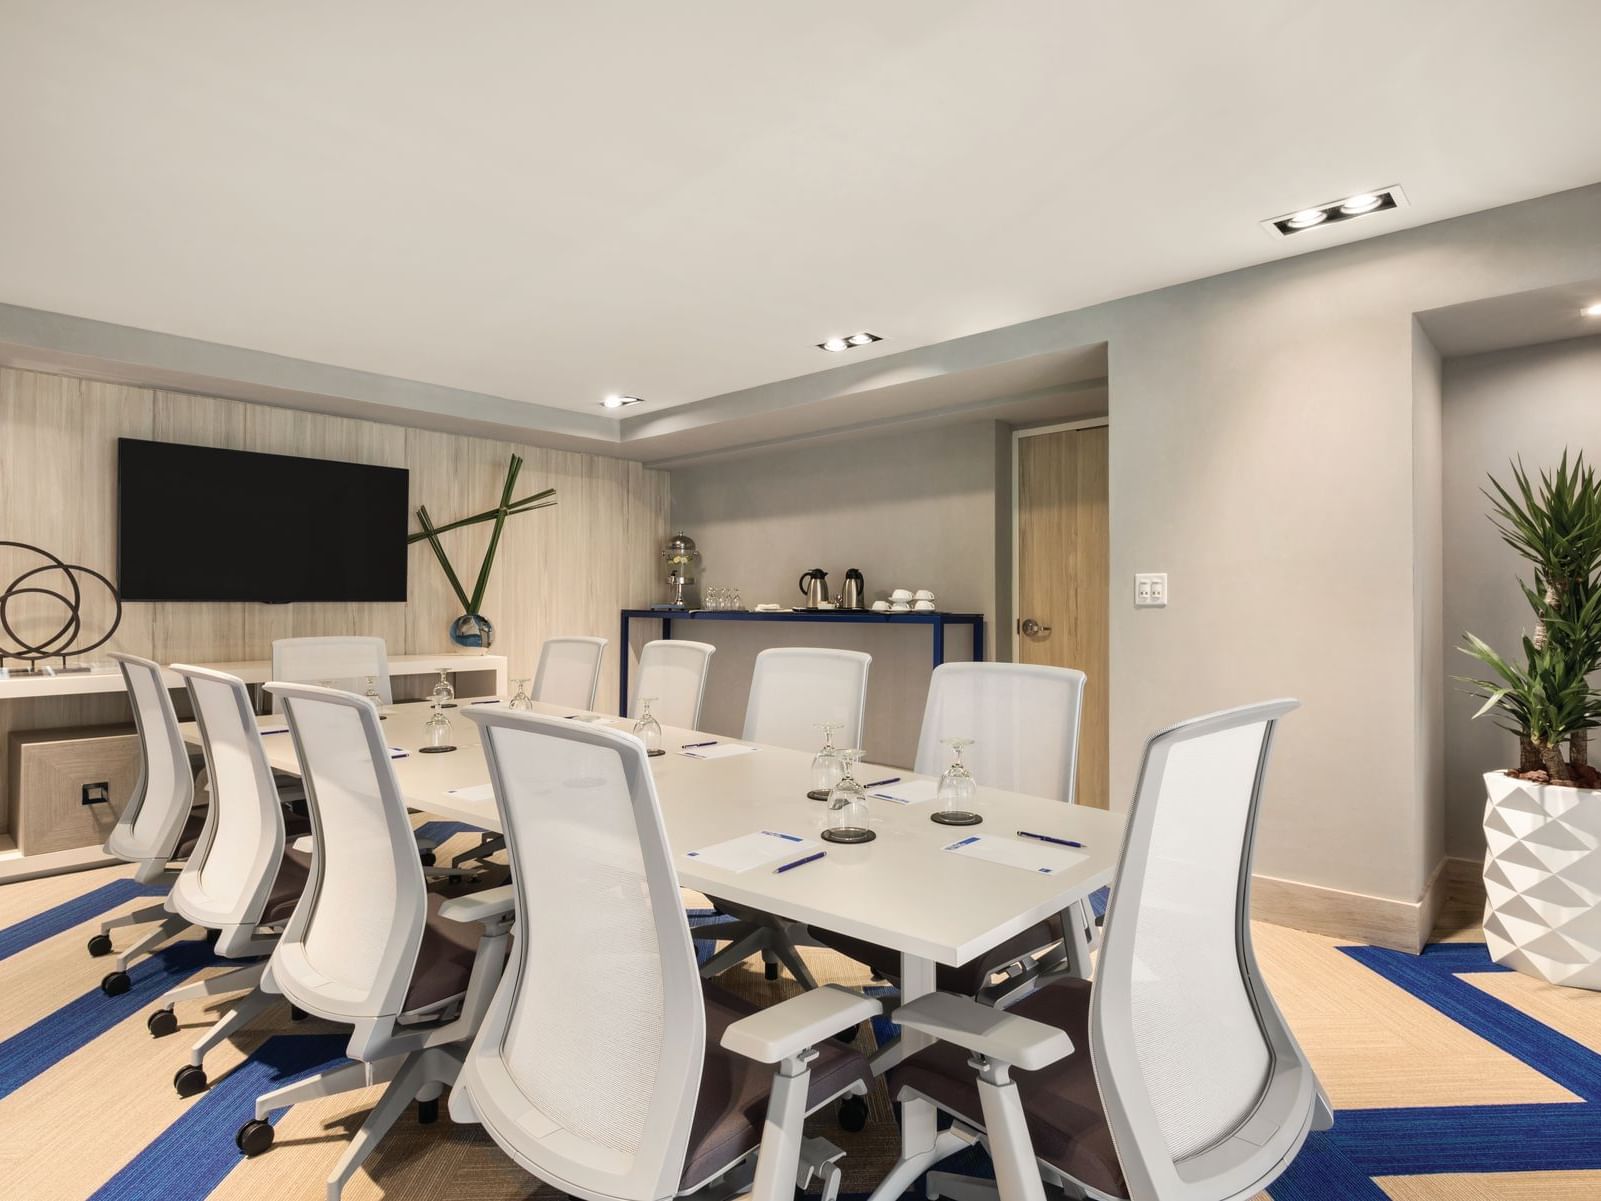 meeting room with conference table, chairs and television